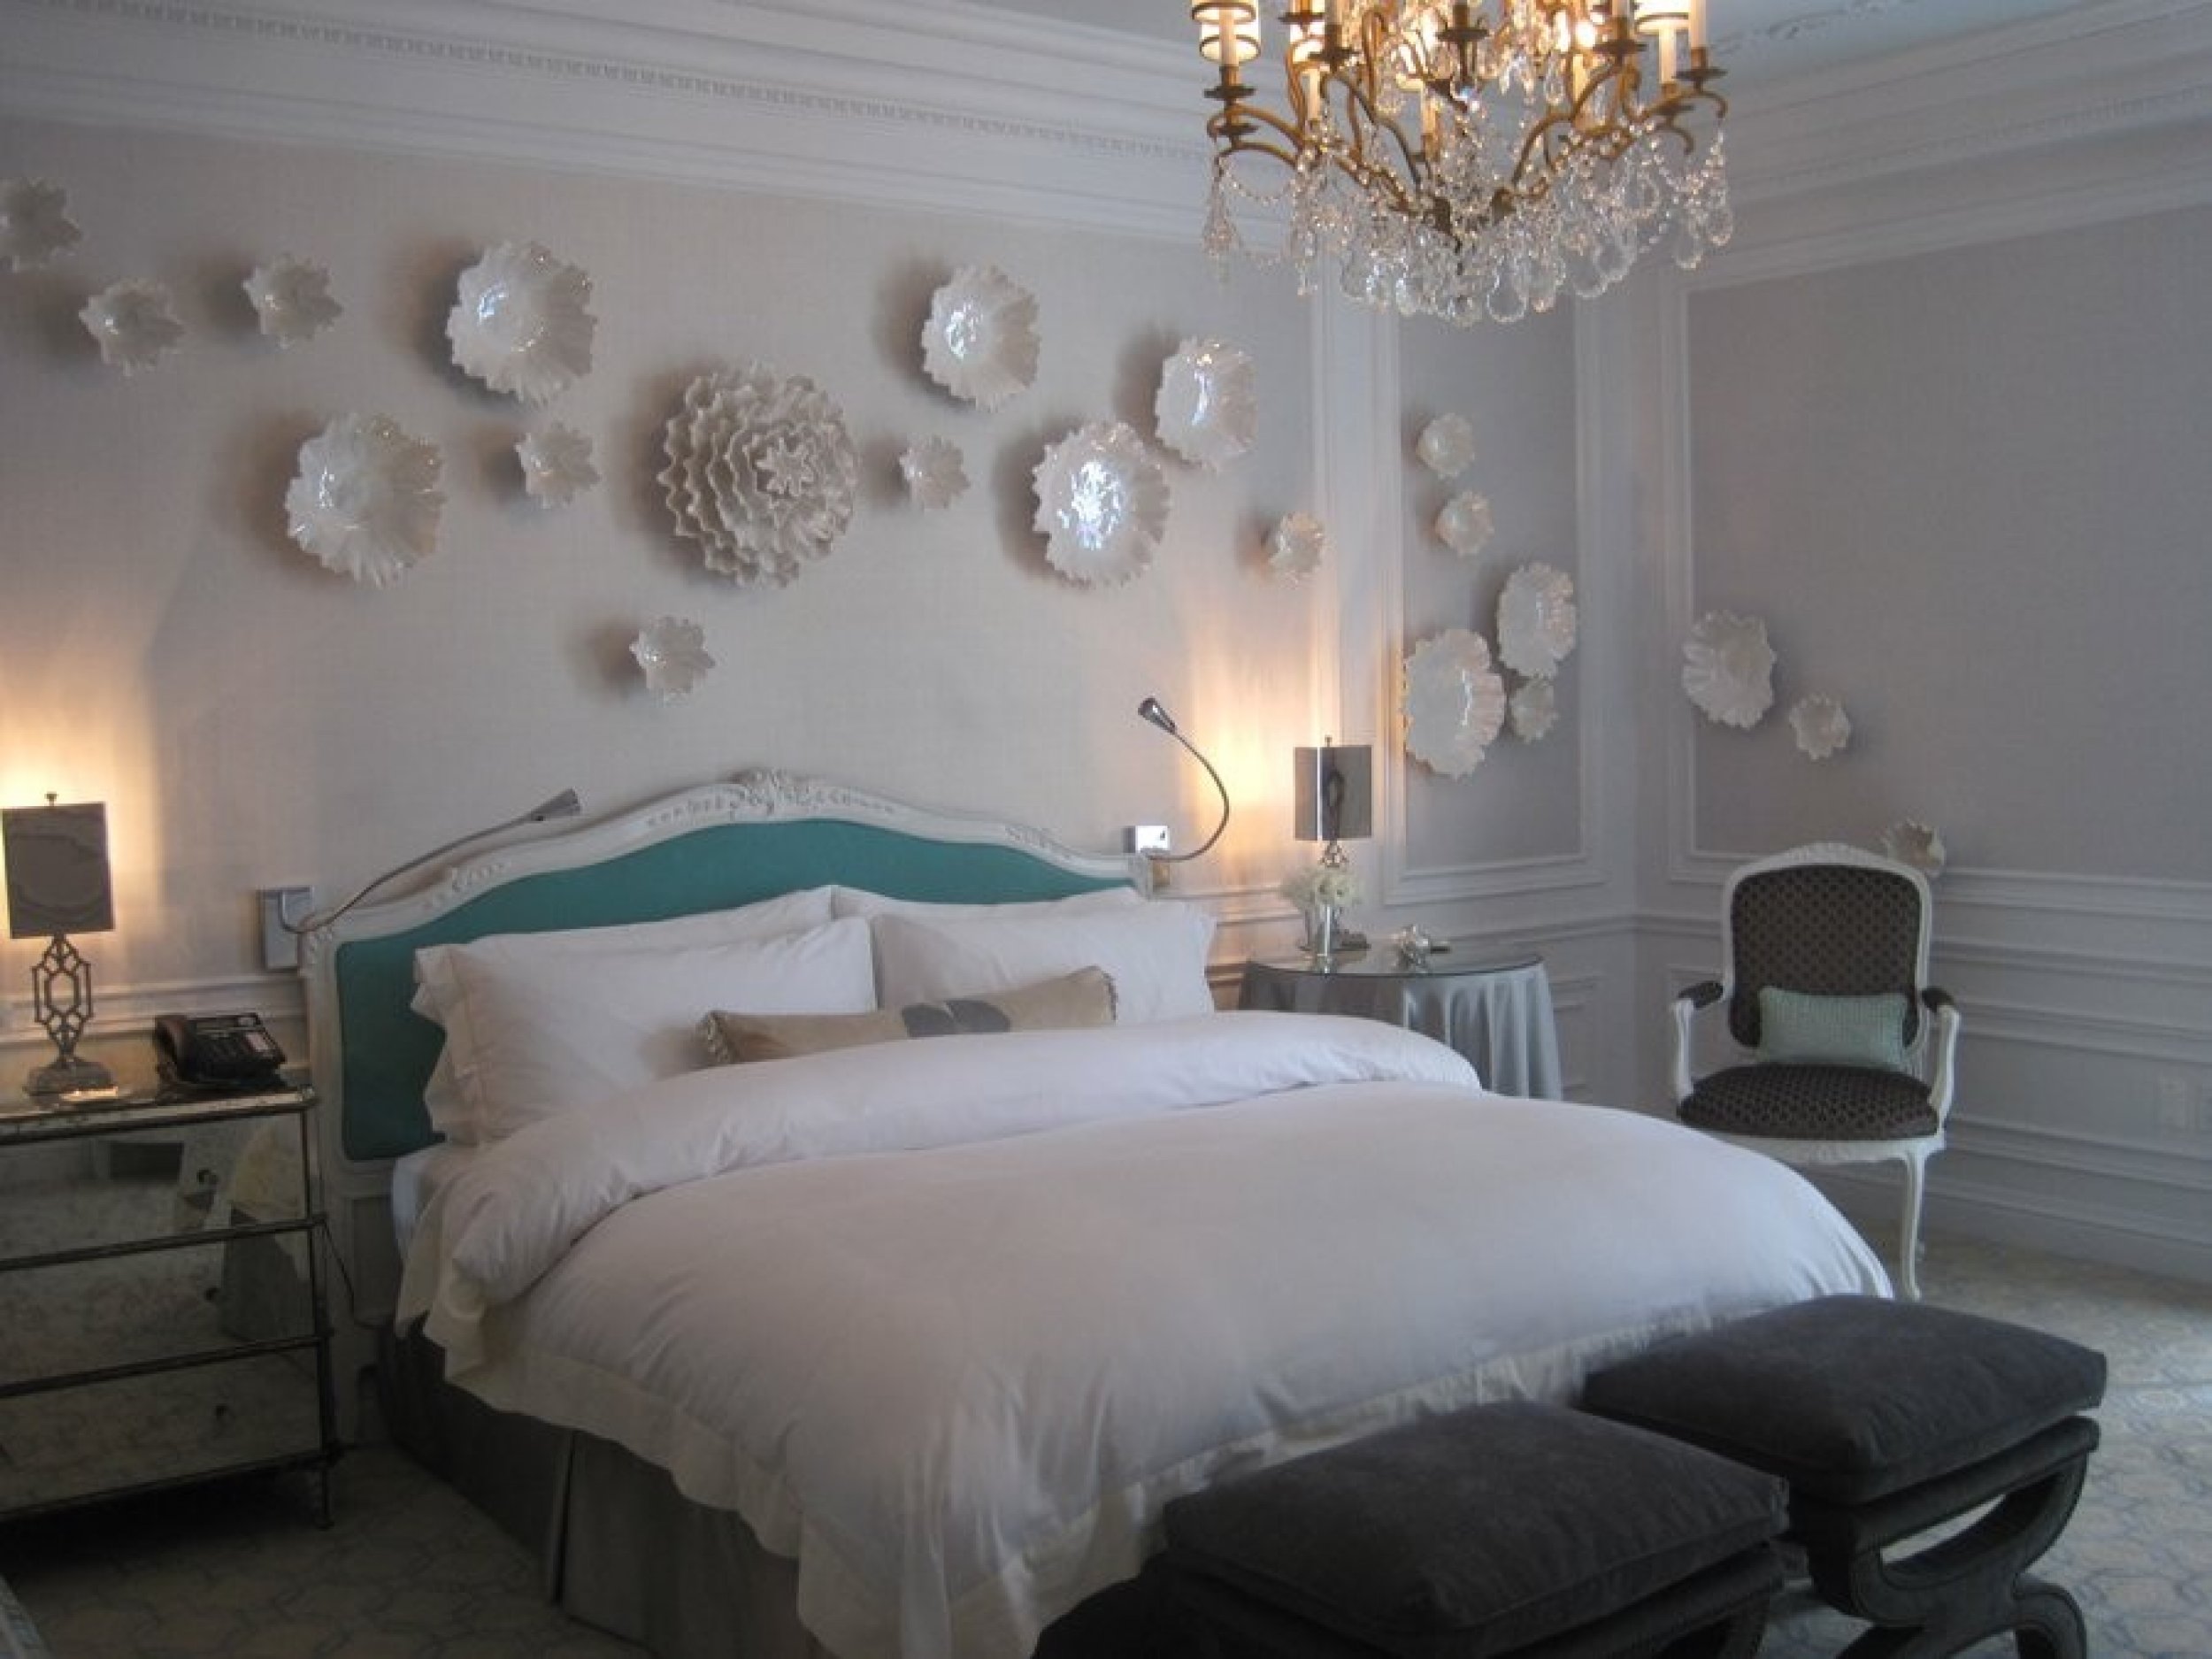 St. Regis hotels new Tiffany suite cost  8,500 a night